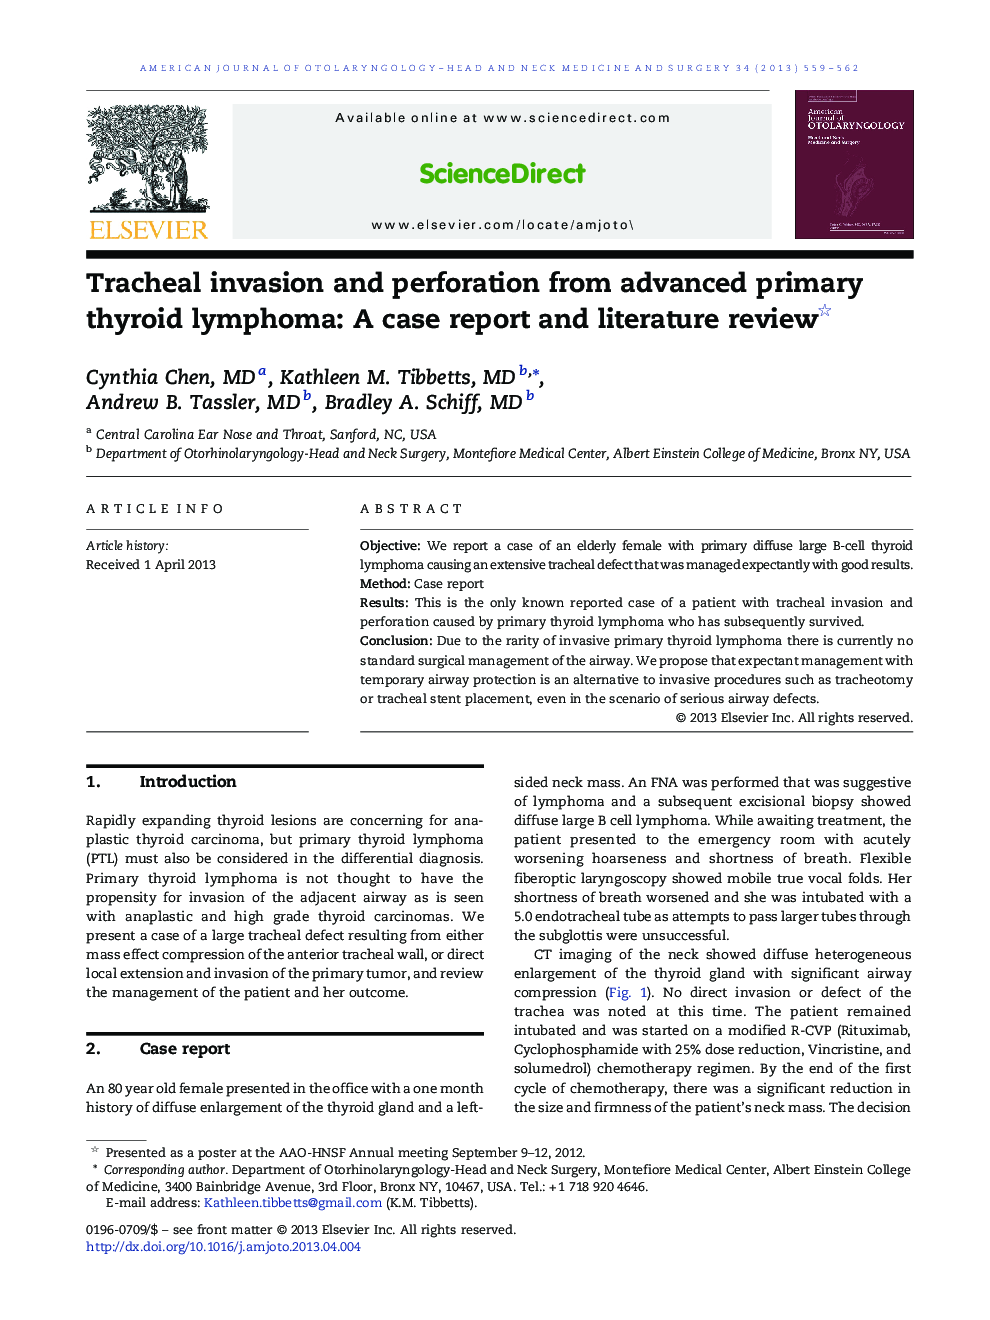 Tracheal invasion and perforation from advanced primary thyroid lymphoma: A case report and literature review 